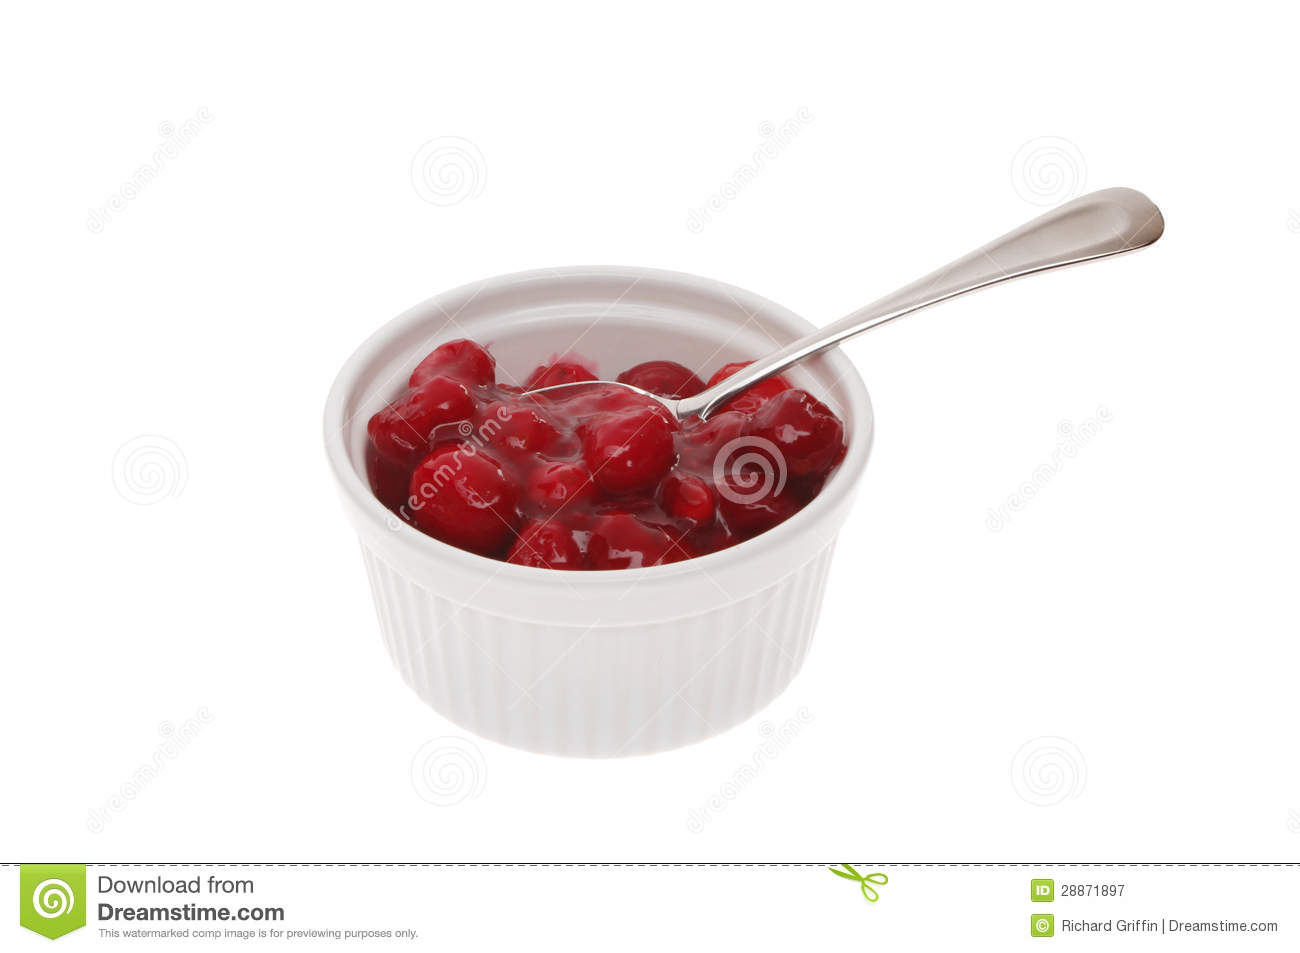 Cranberry Sauce Royalty Free Stock Photography   Image  28871897